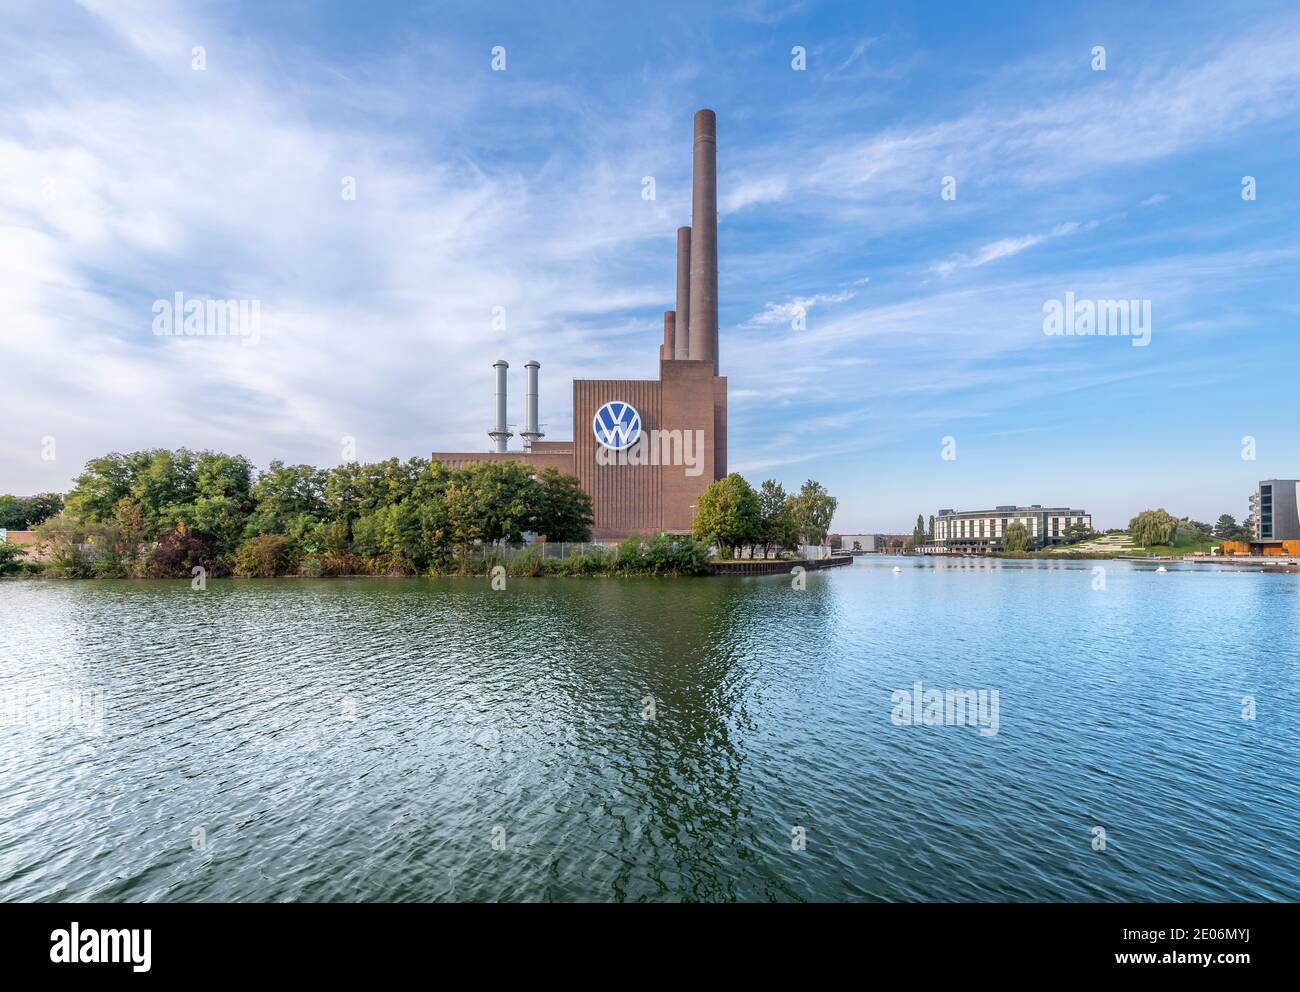 The iconic Volkswagen power station for their huge factory in Wolfsburg on the Mittellandkanal, kanal. Opposite is the VW Autostadt - car city. Stock Photo